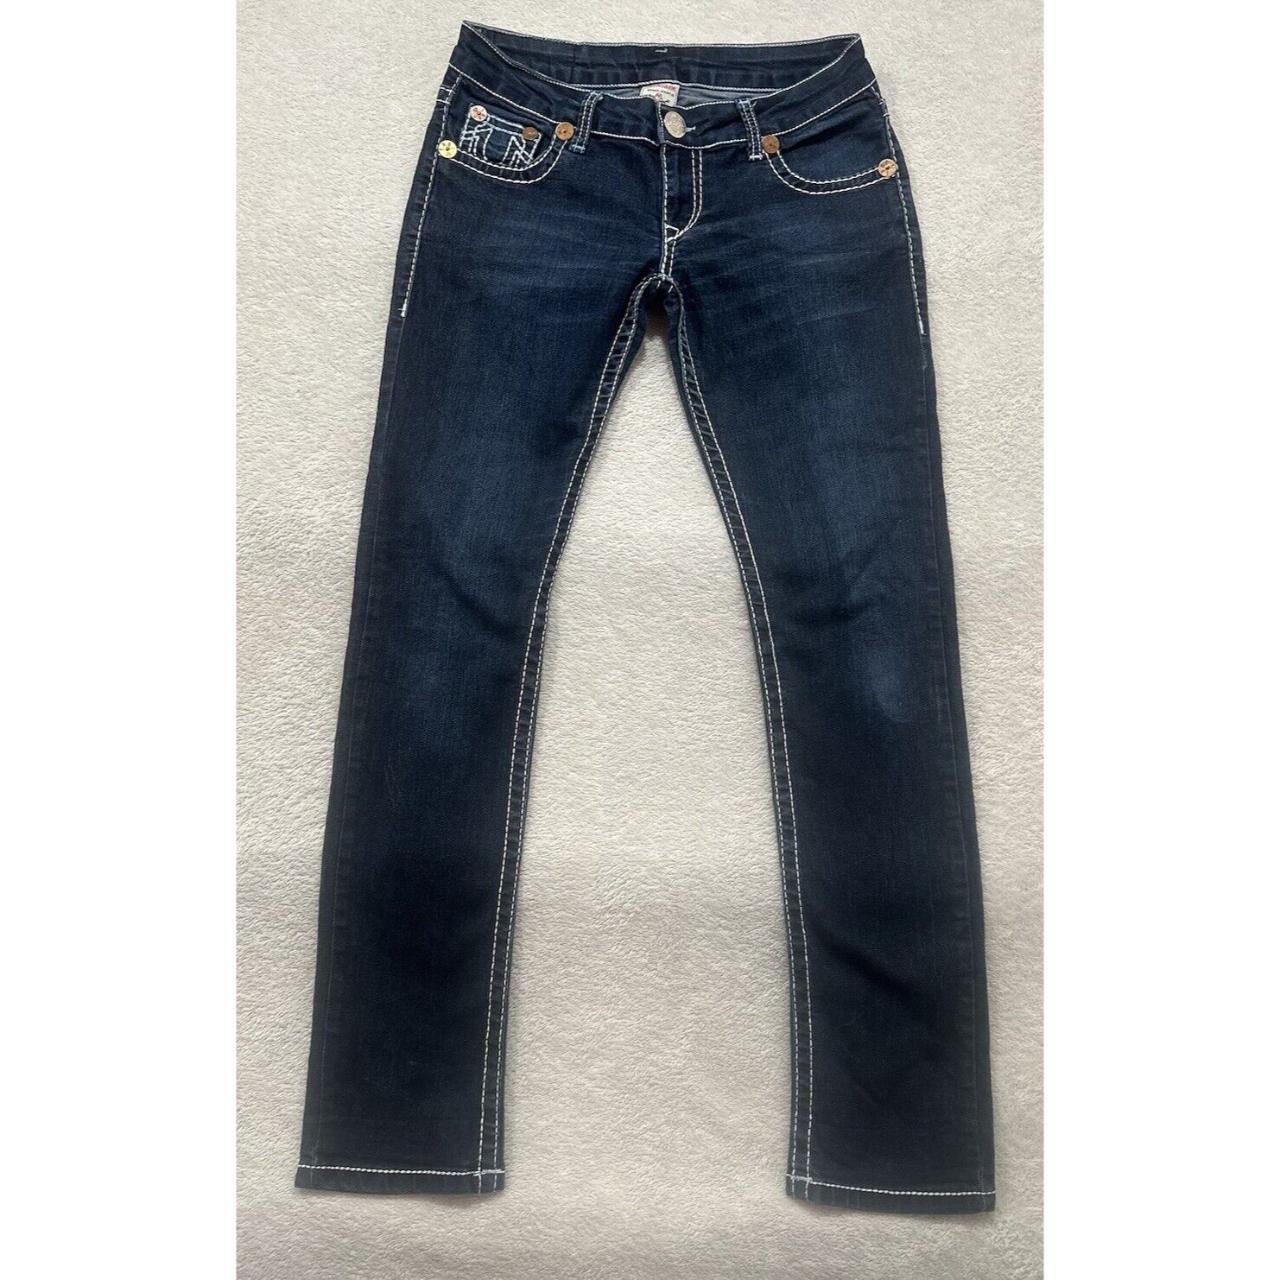 These True Religion jeans for women are a stylish... - Depop